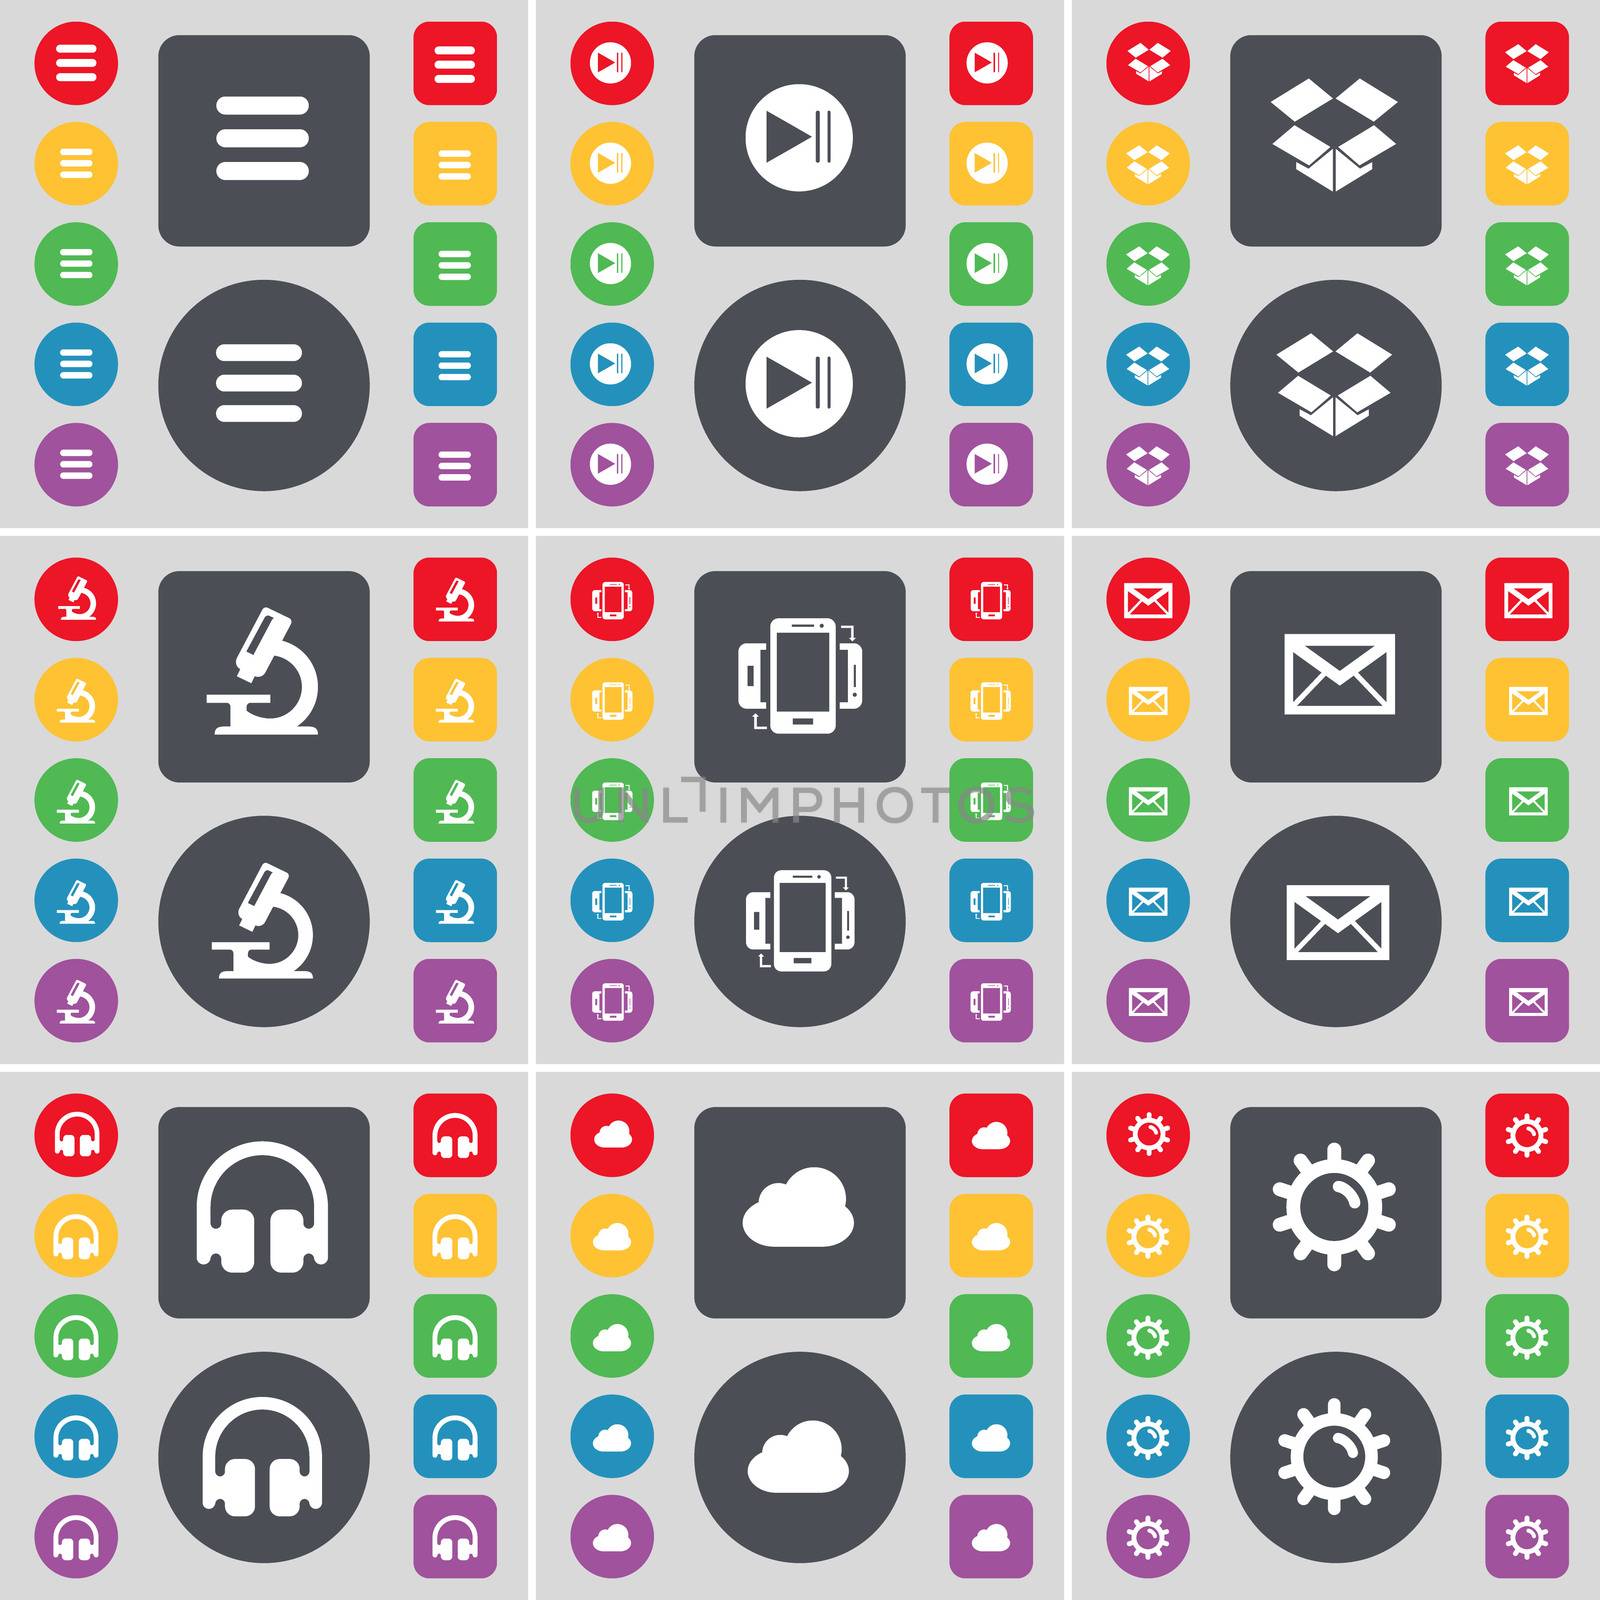 Apps, Media skip, Dropbox, Microscope, Smartphone, Message, Headphones, Cloud, Gear icon symbol. A large set of flat, colored buttons for your design.  by serhii_lohvyniuk